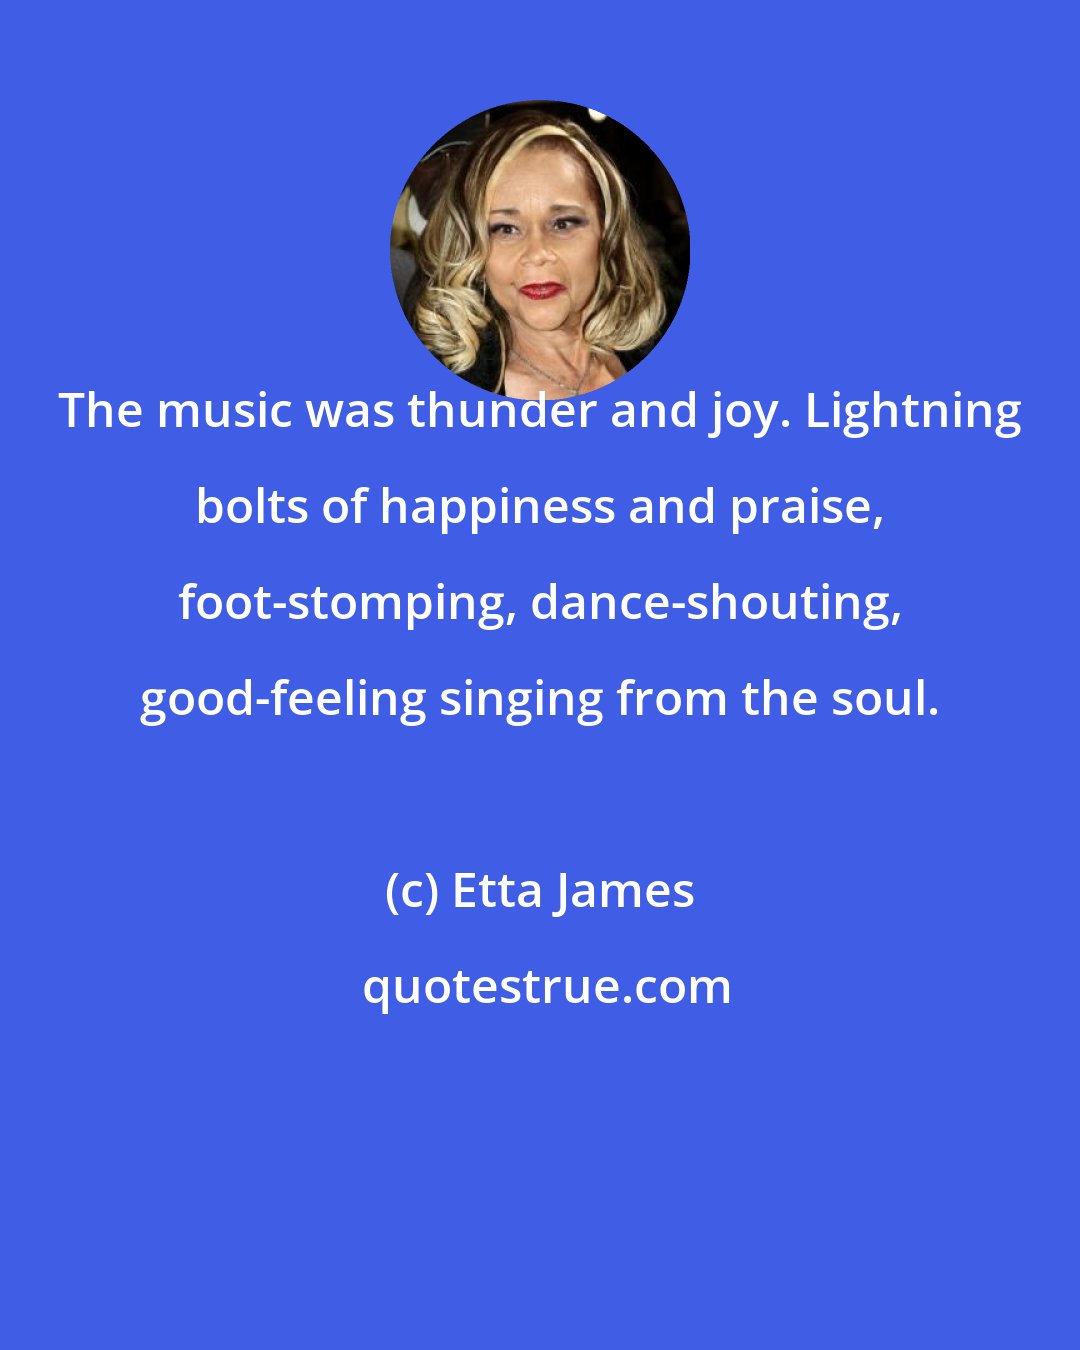 Etta James: The music was thunder and joy. Lightning bolts of happiness and praise, foot-stomping, dance-shouting, good-feeling singing from the soul.